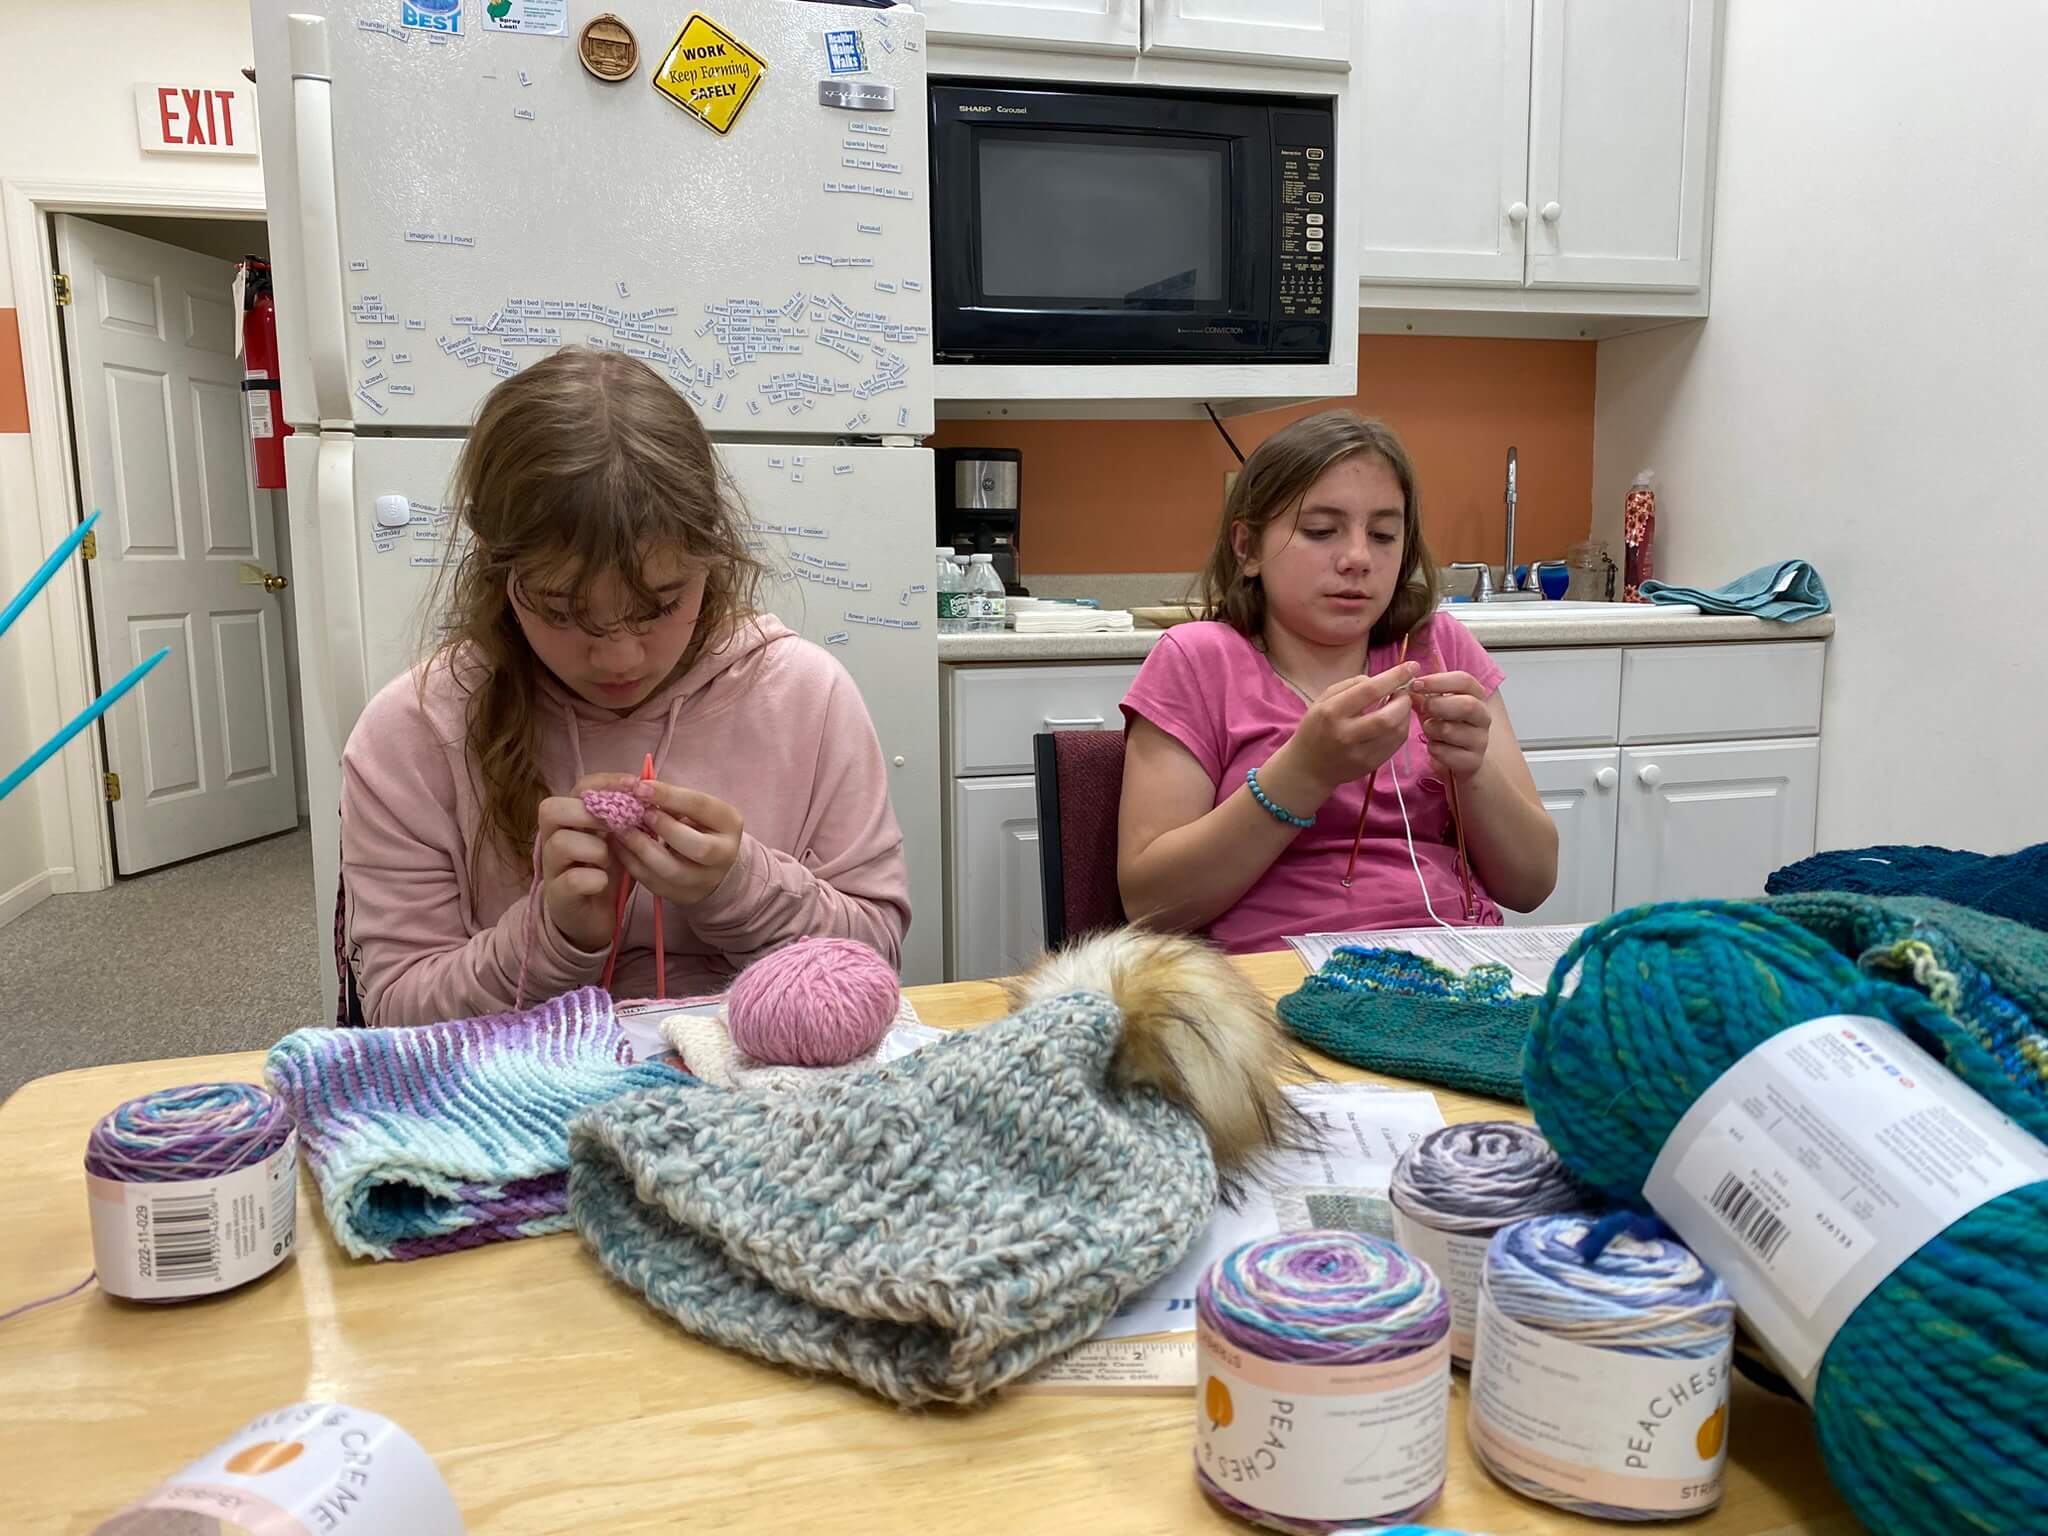 4-Hers knitting their projects